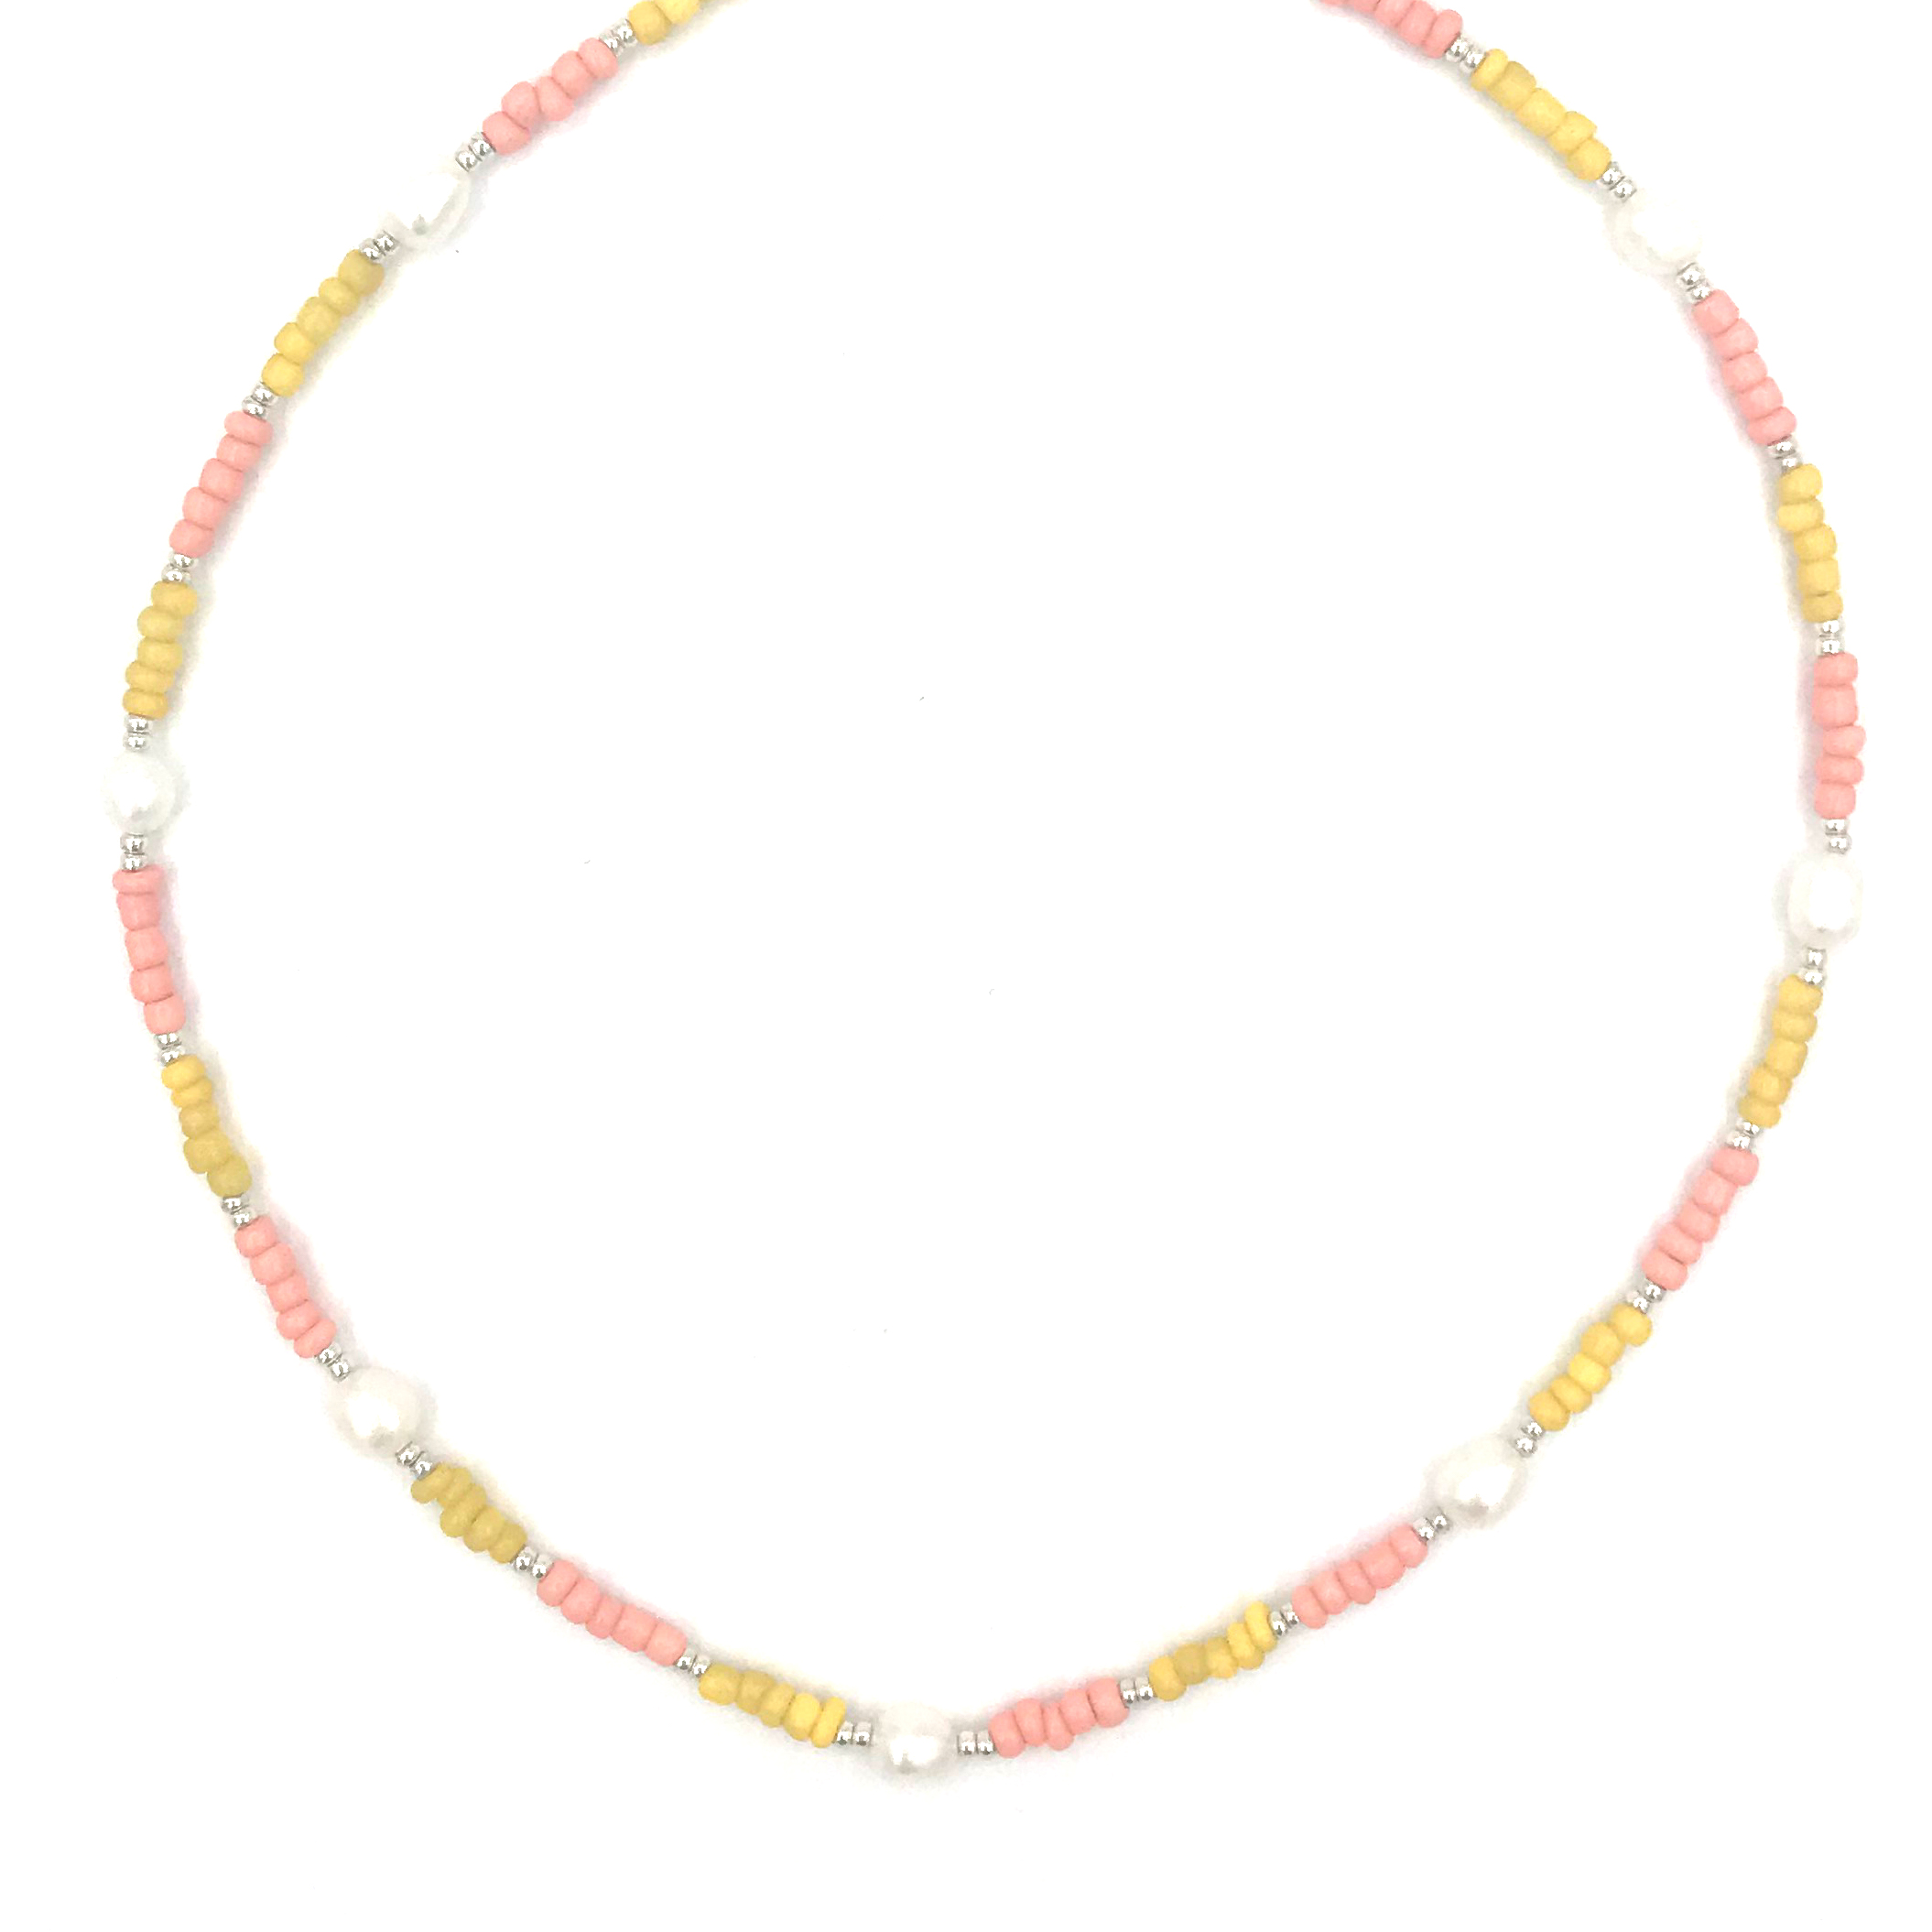 Yellow beach pearl necklace